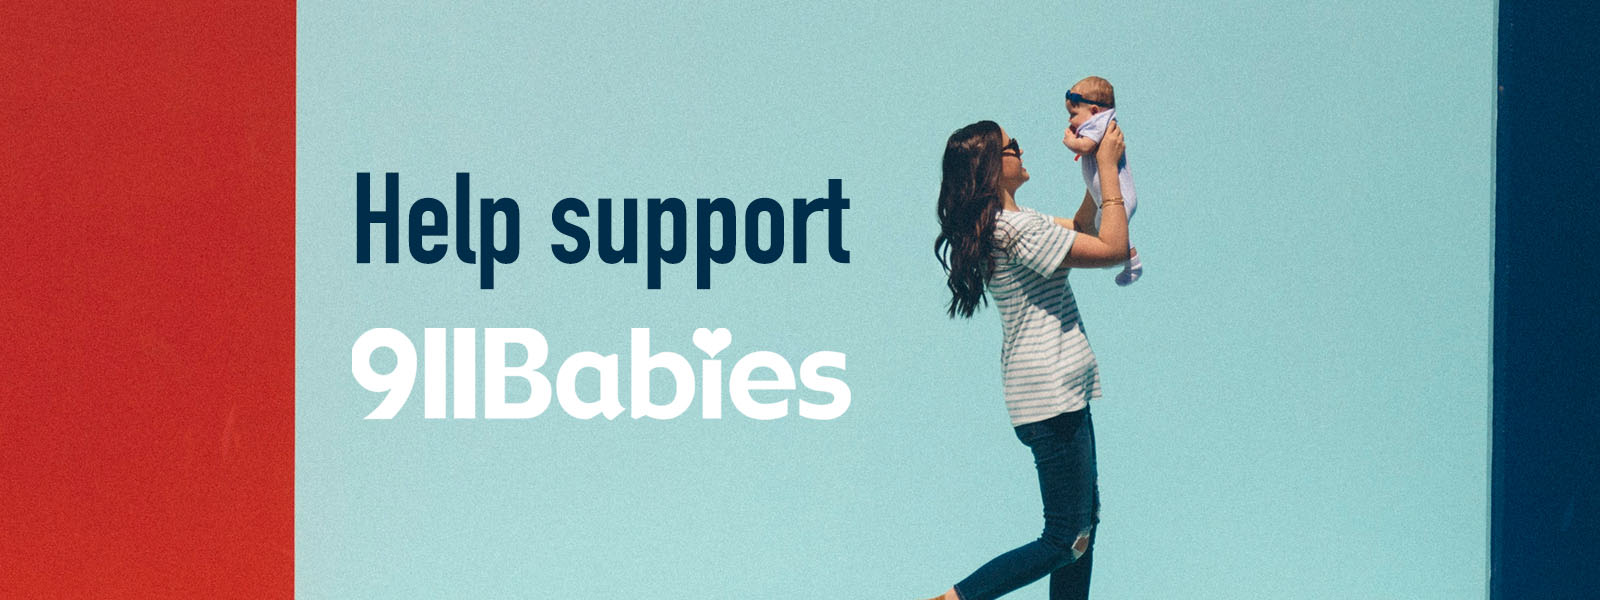 Support 911 Babies